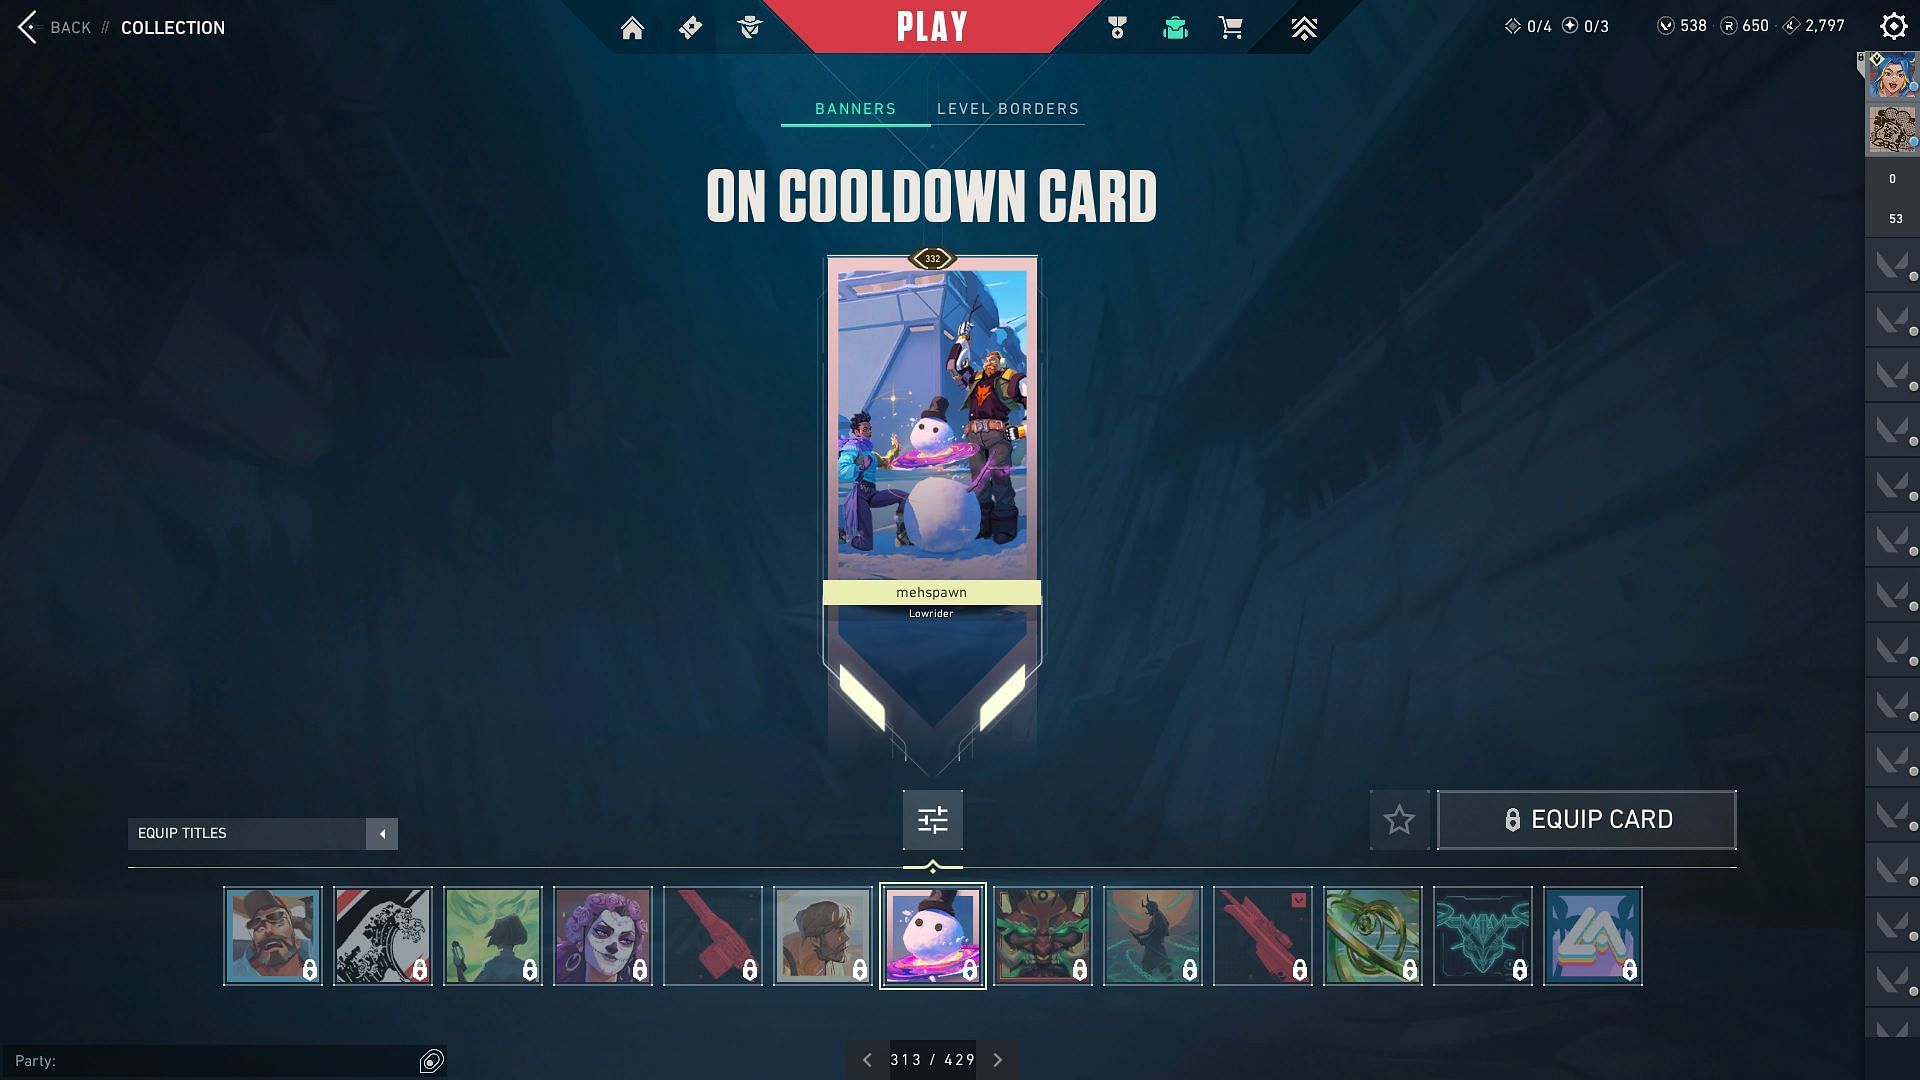 On Cooldown Player Card (Image via Riot Games)